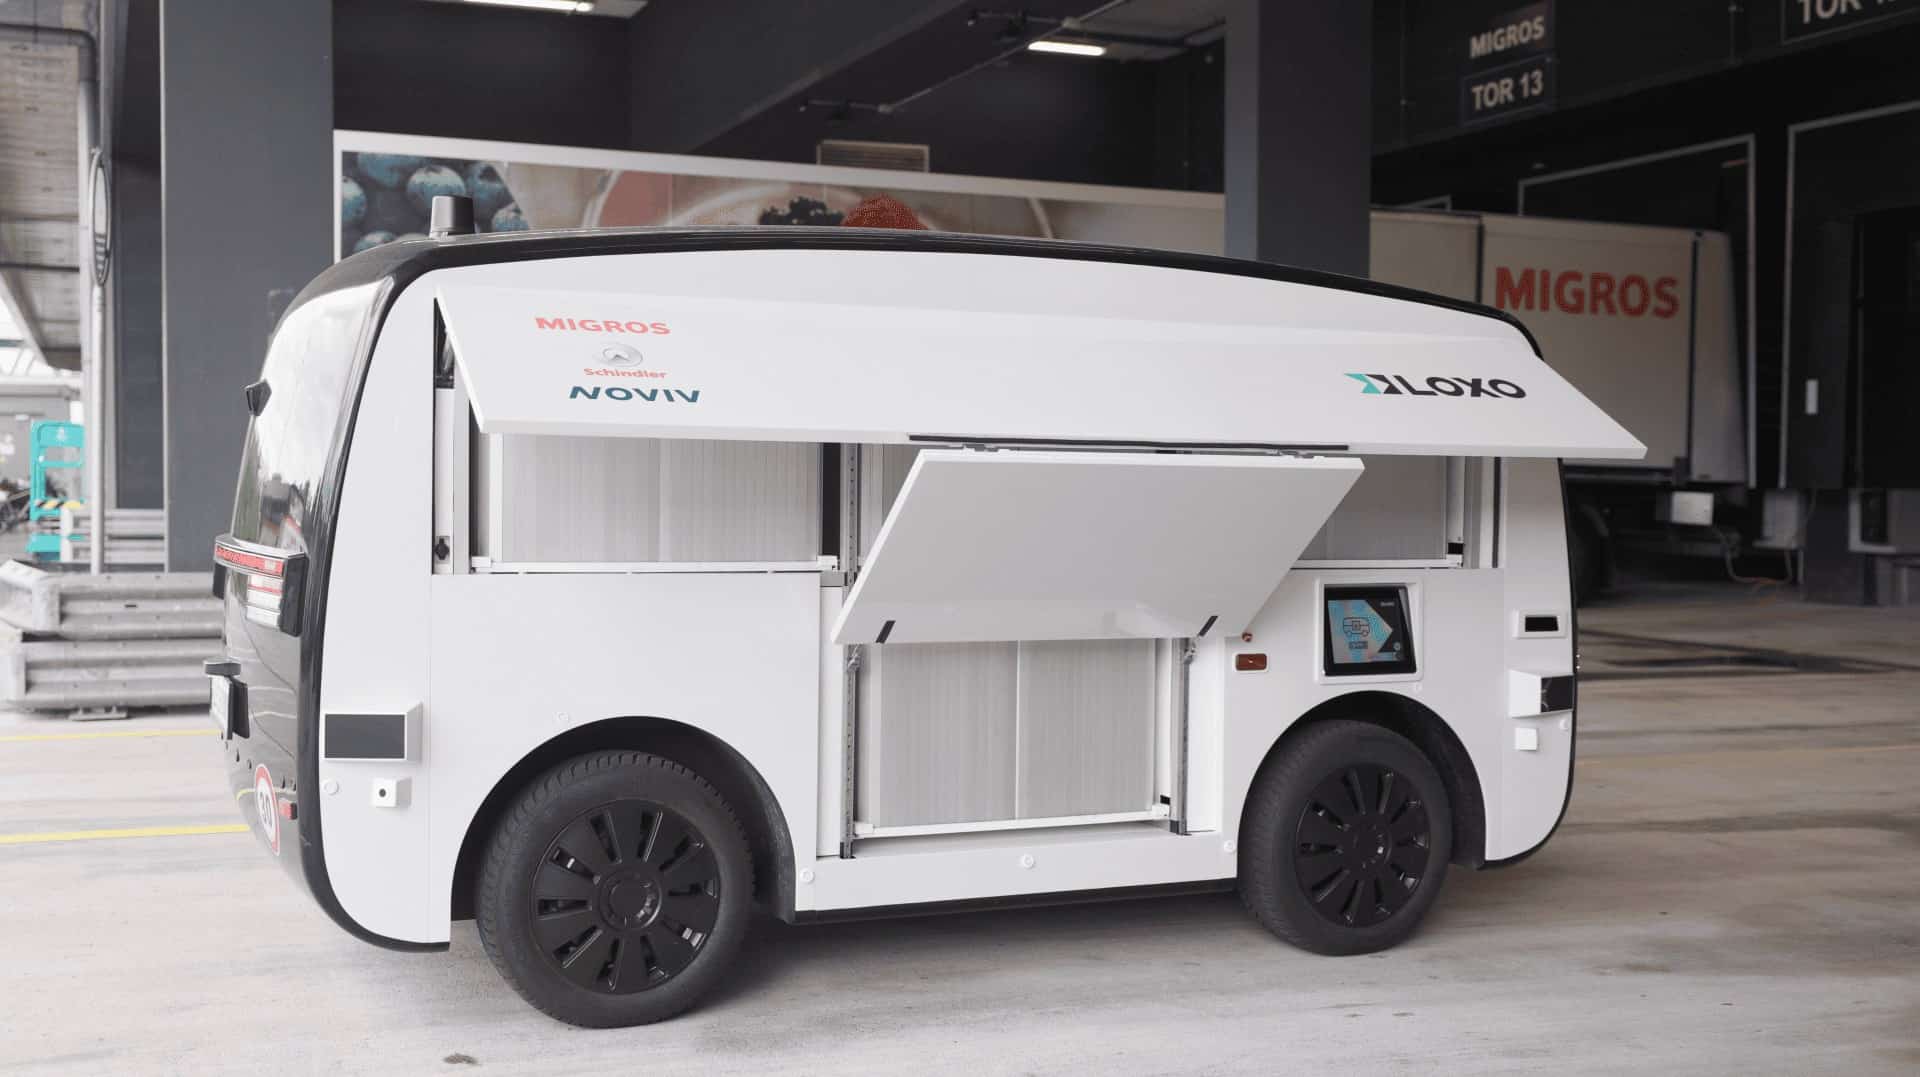 Europe's first driverless delivery vehicle: meet LOXO